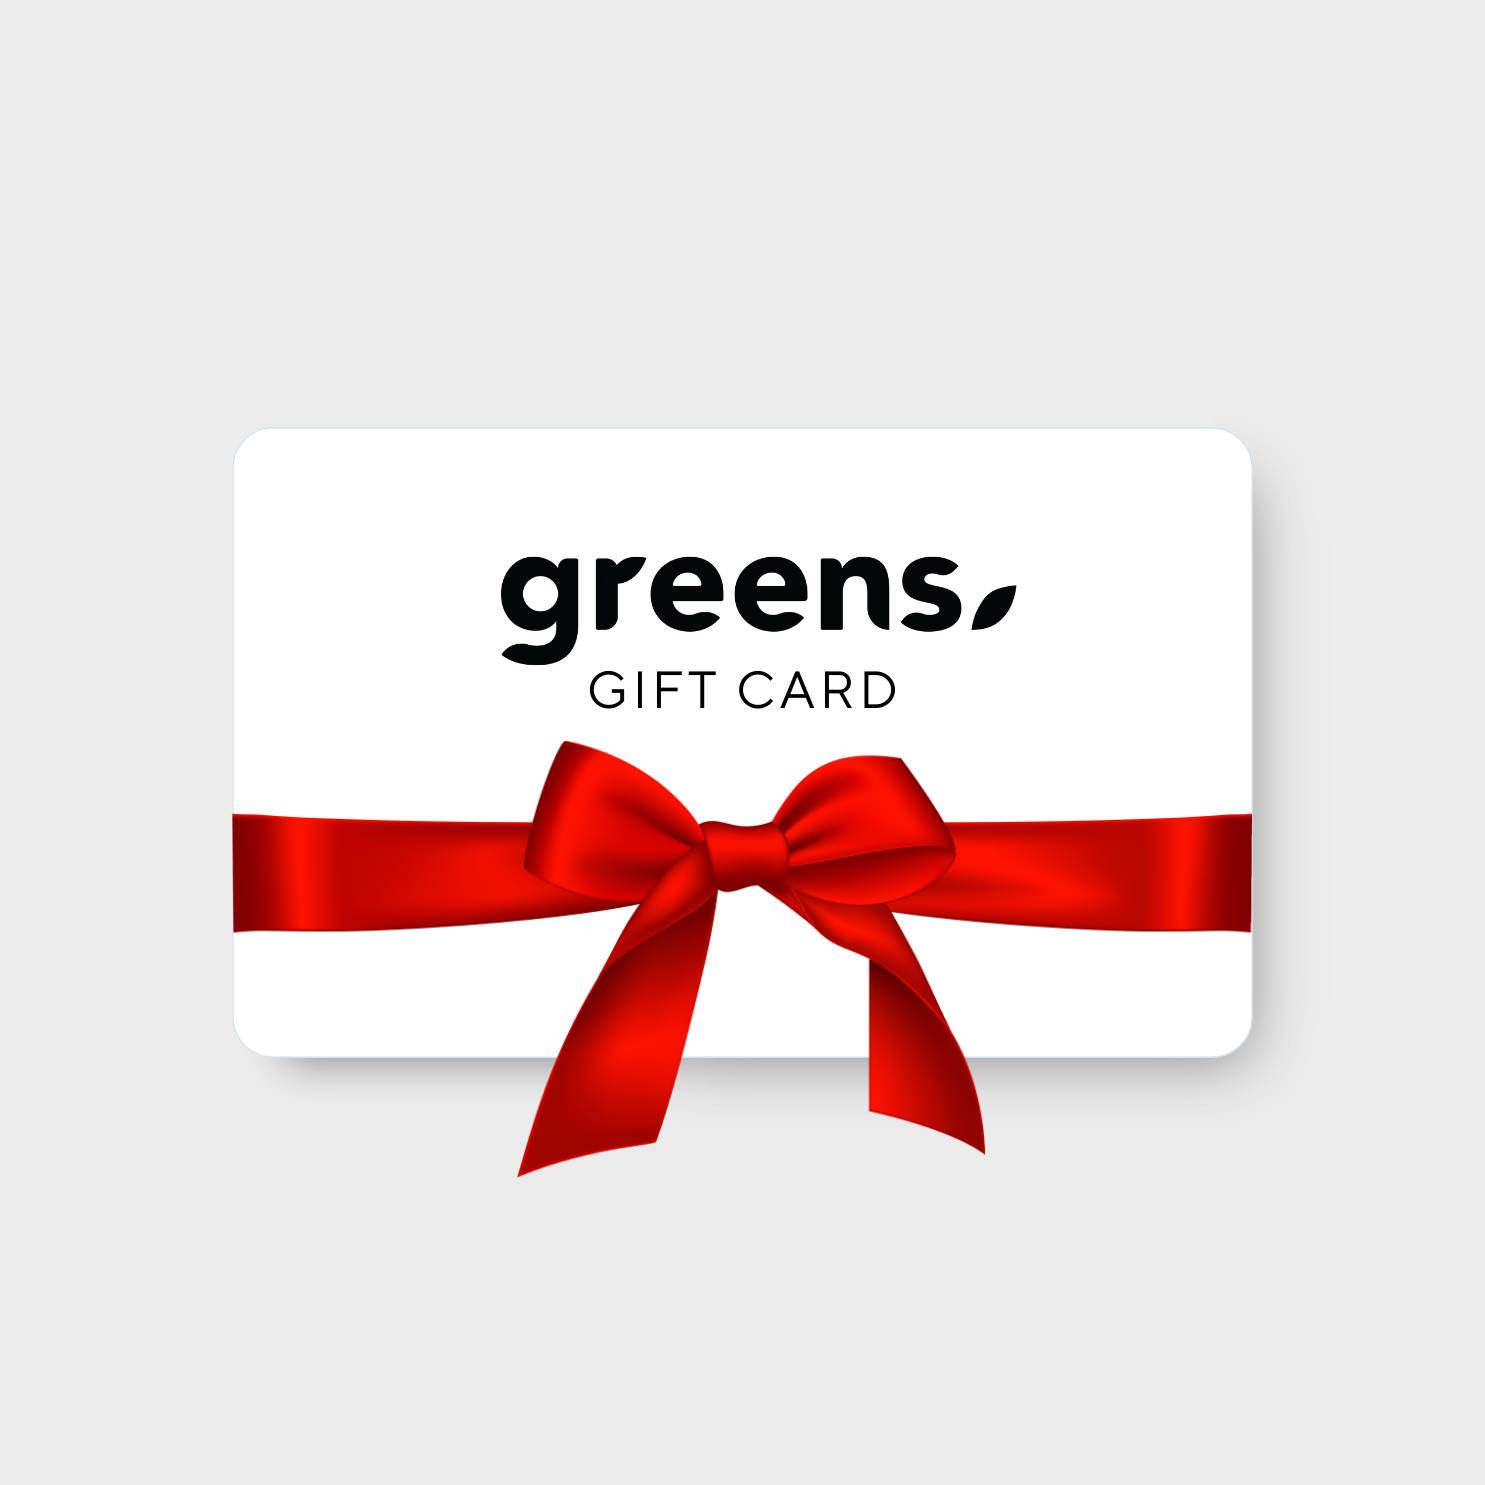 GIFT CARD - Greens Medi Scrubs South Africa - Premium Medical Uniforms & Apparel - Delivery Across SA 